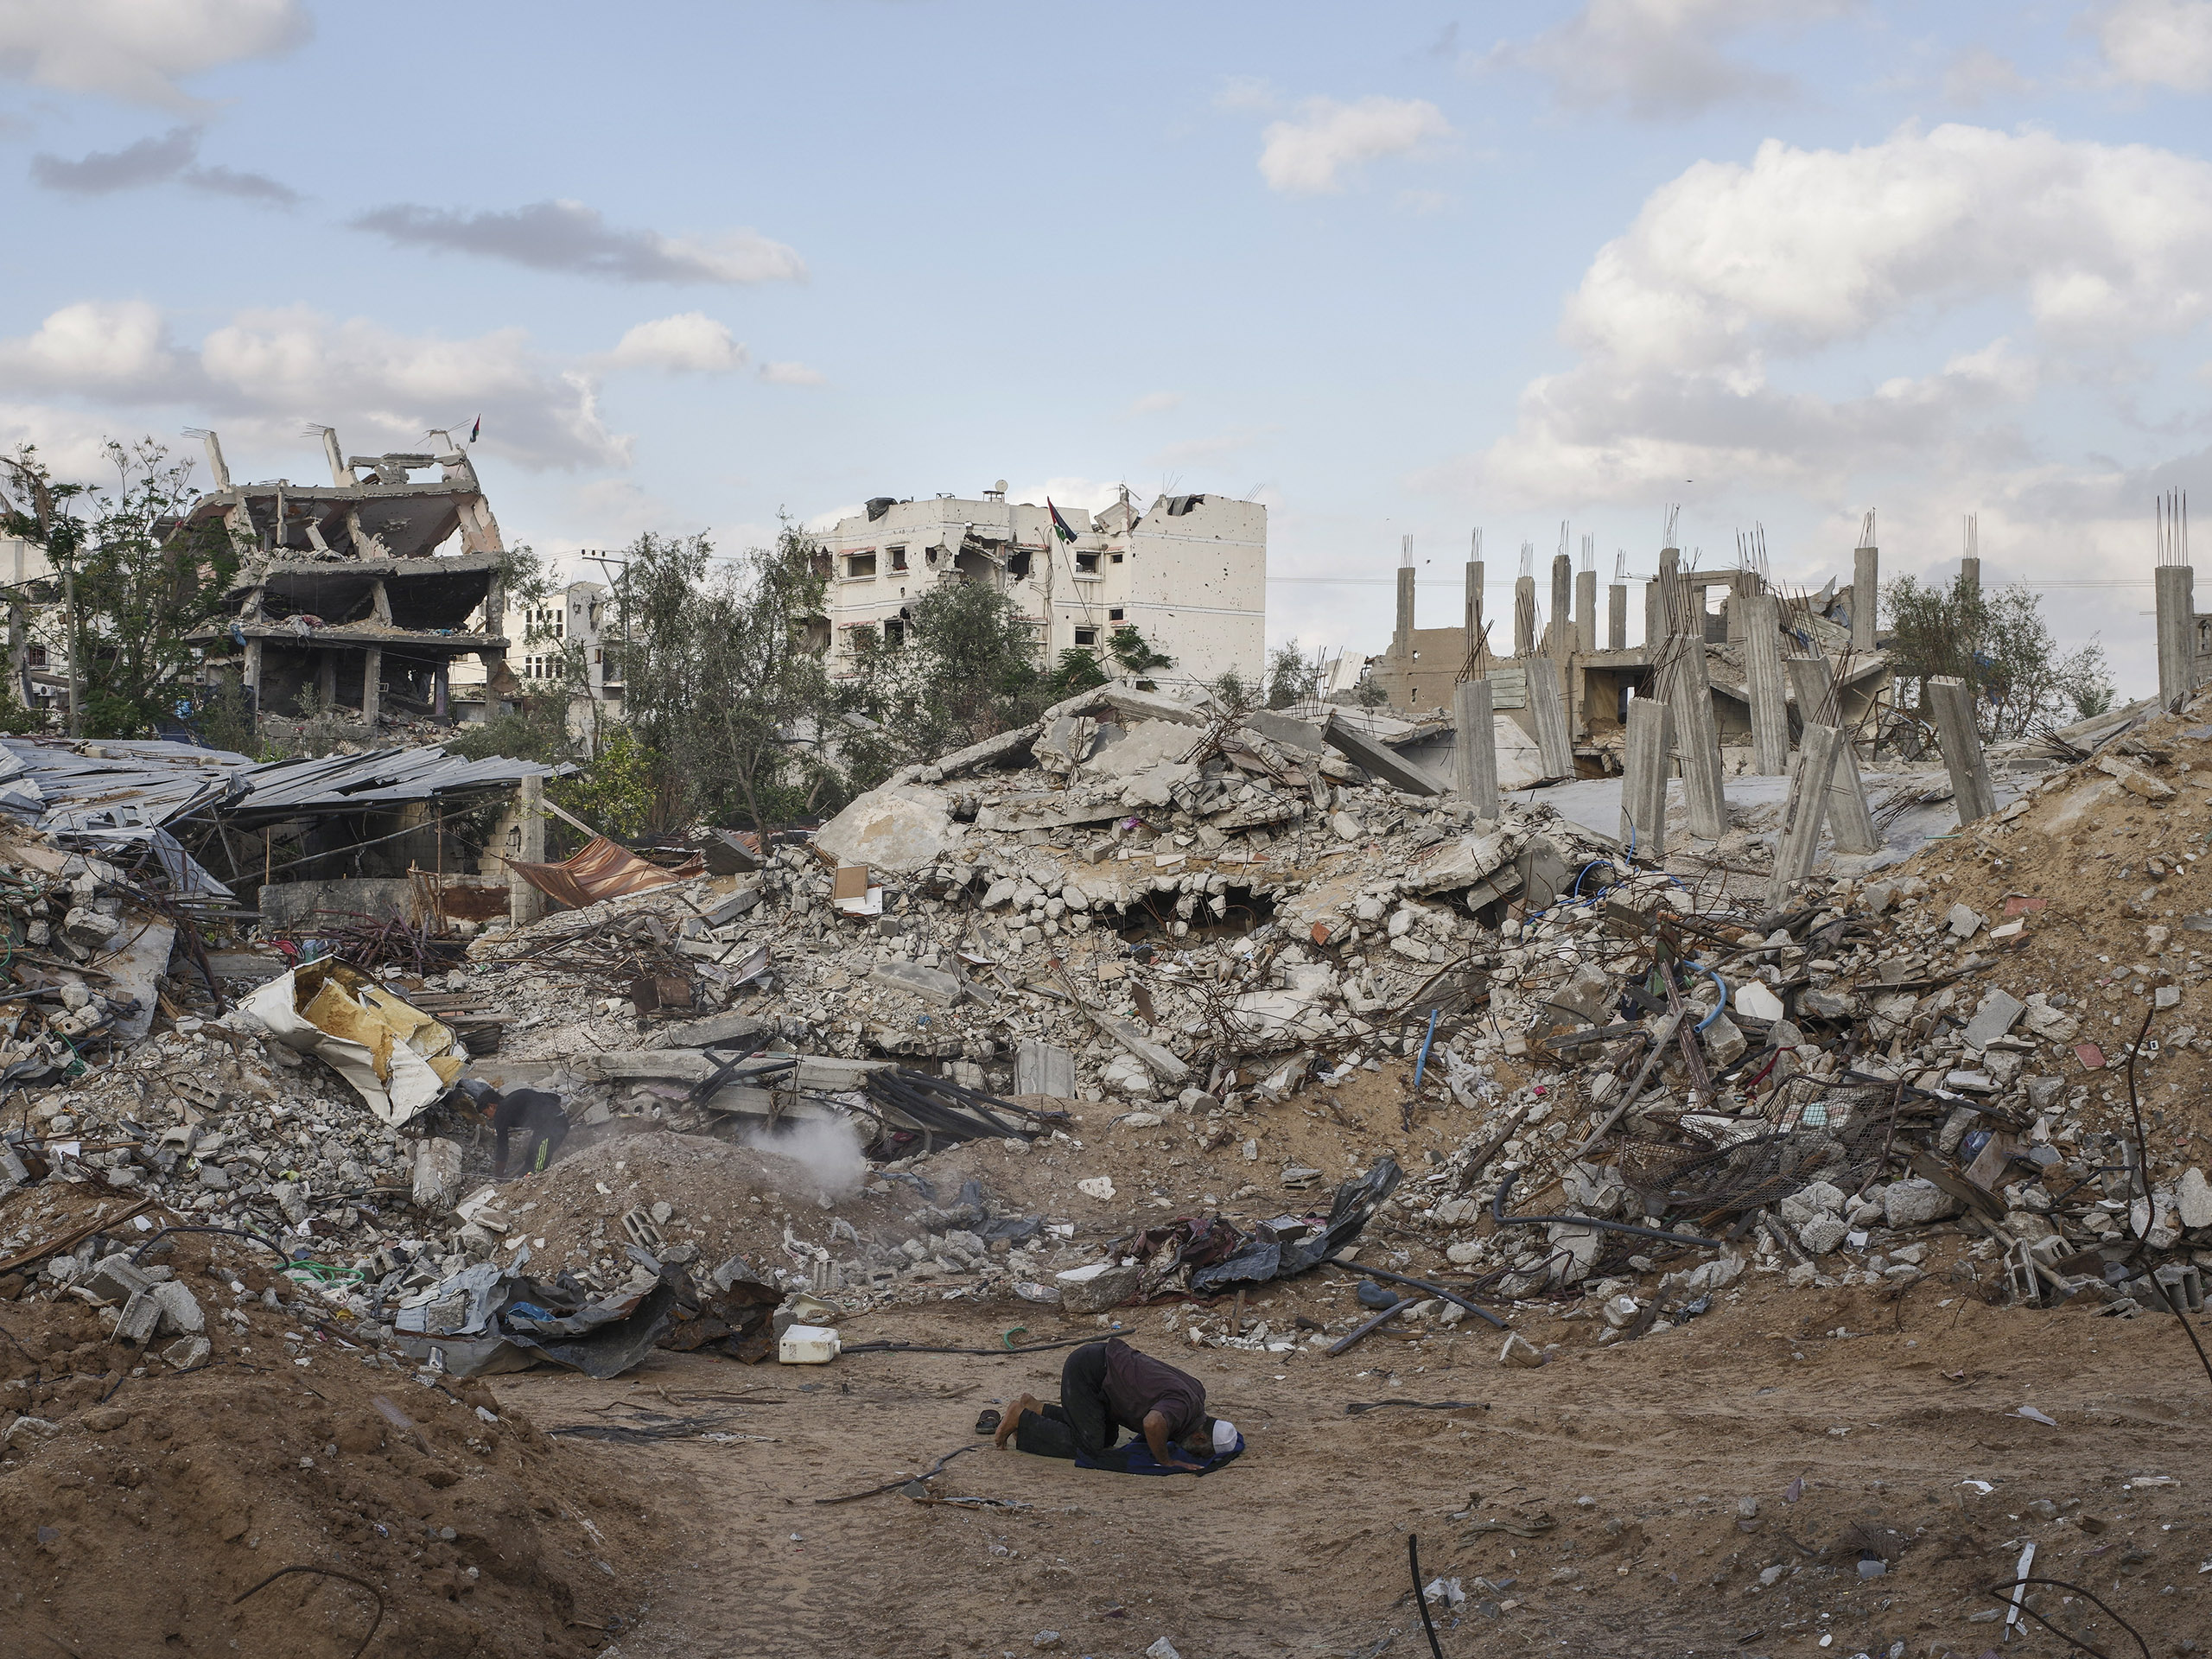 A Palestinian man prays in a Gaza neighborhood destroyed during the war last year between Hamas and Israel.From  The Path to Peace.  January 19, 2015 issue.